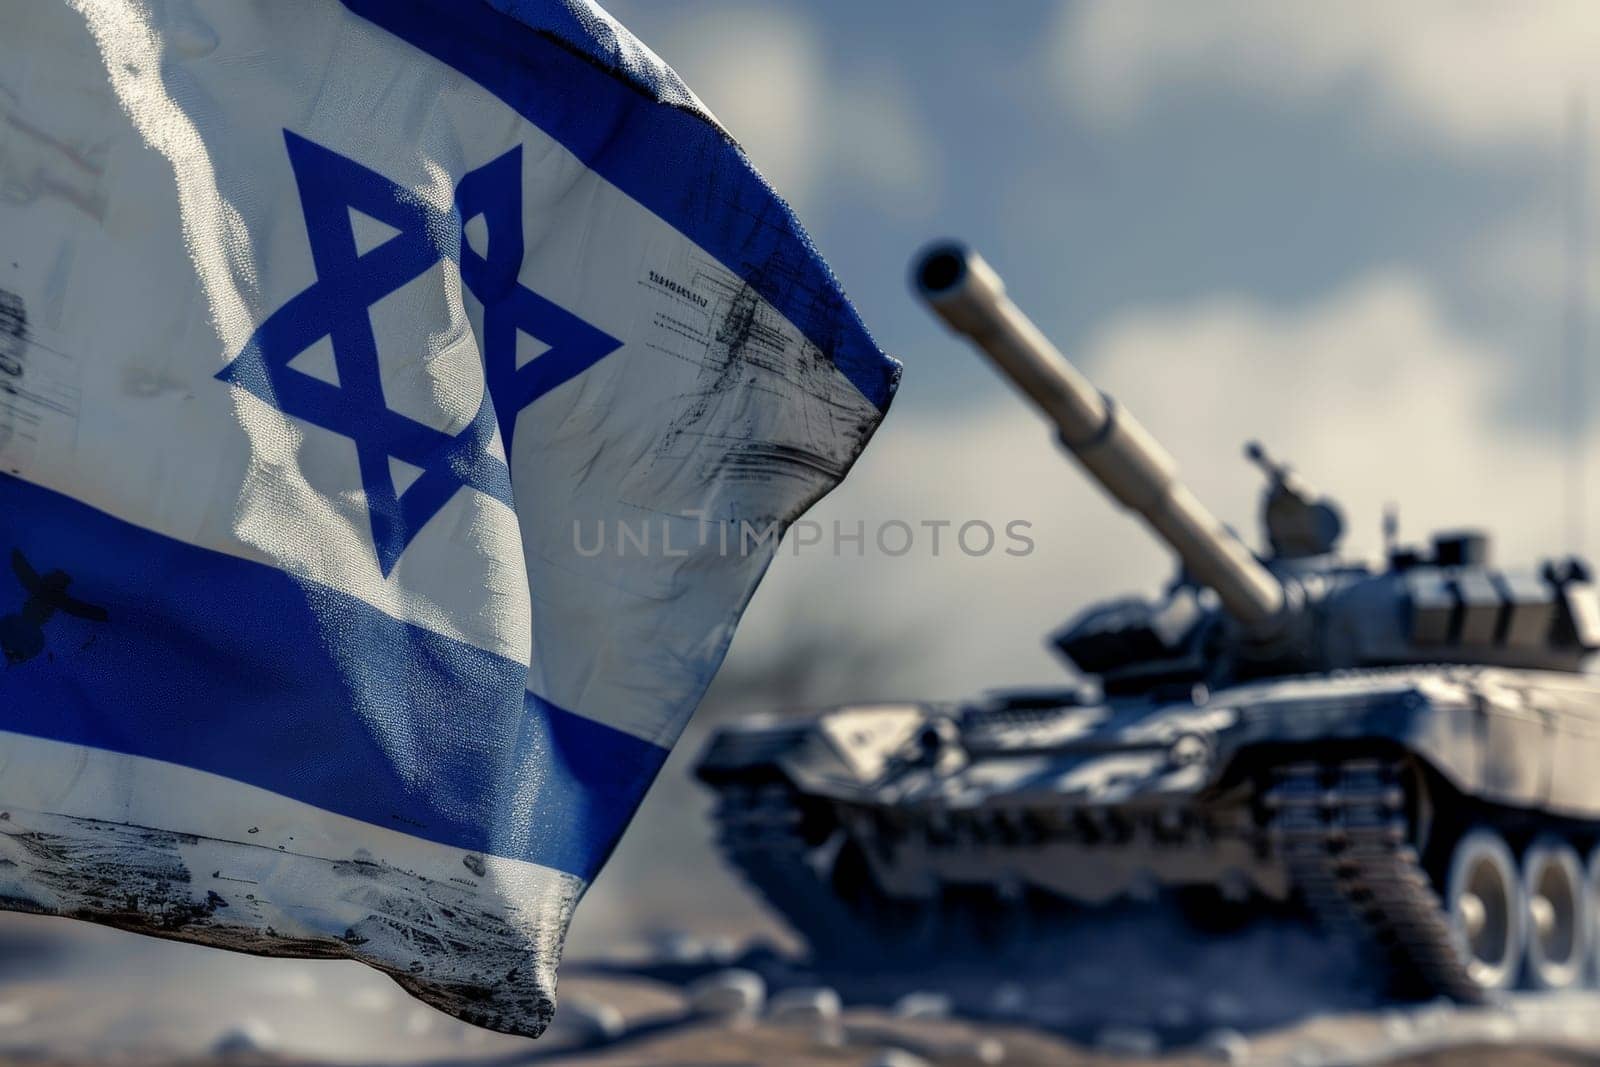 A flag with the word Israel on it is flying next to a tank. The flag is torn and dirty, and the tank is large and intimidating. Concept of conflict and tension